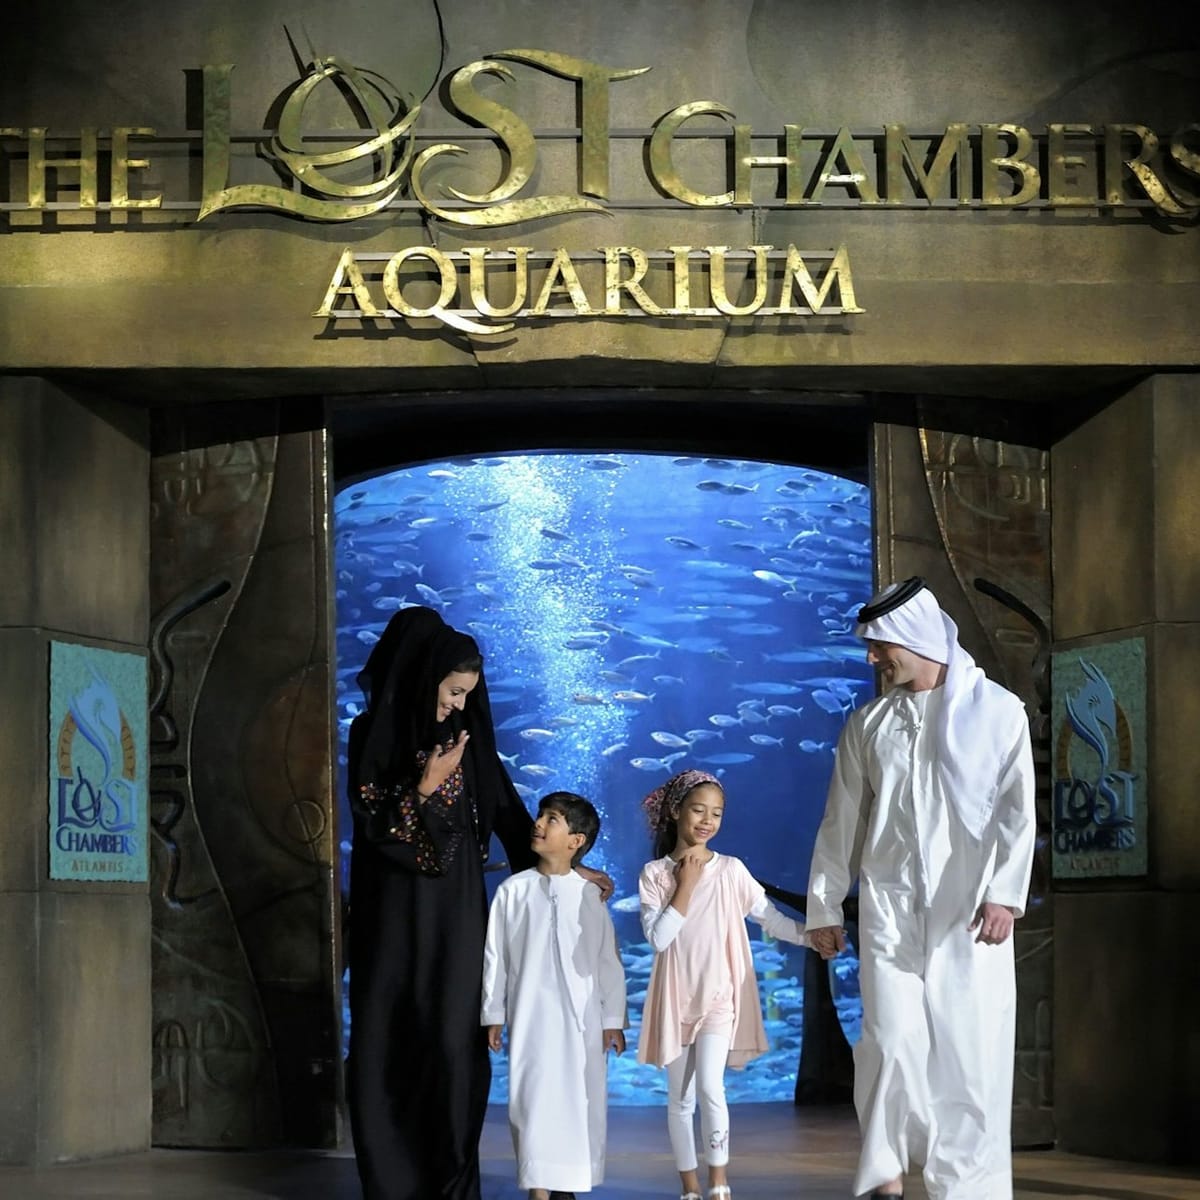 the-lost-chambers-aquarium-entry-ticket_1